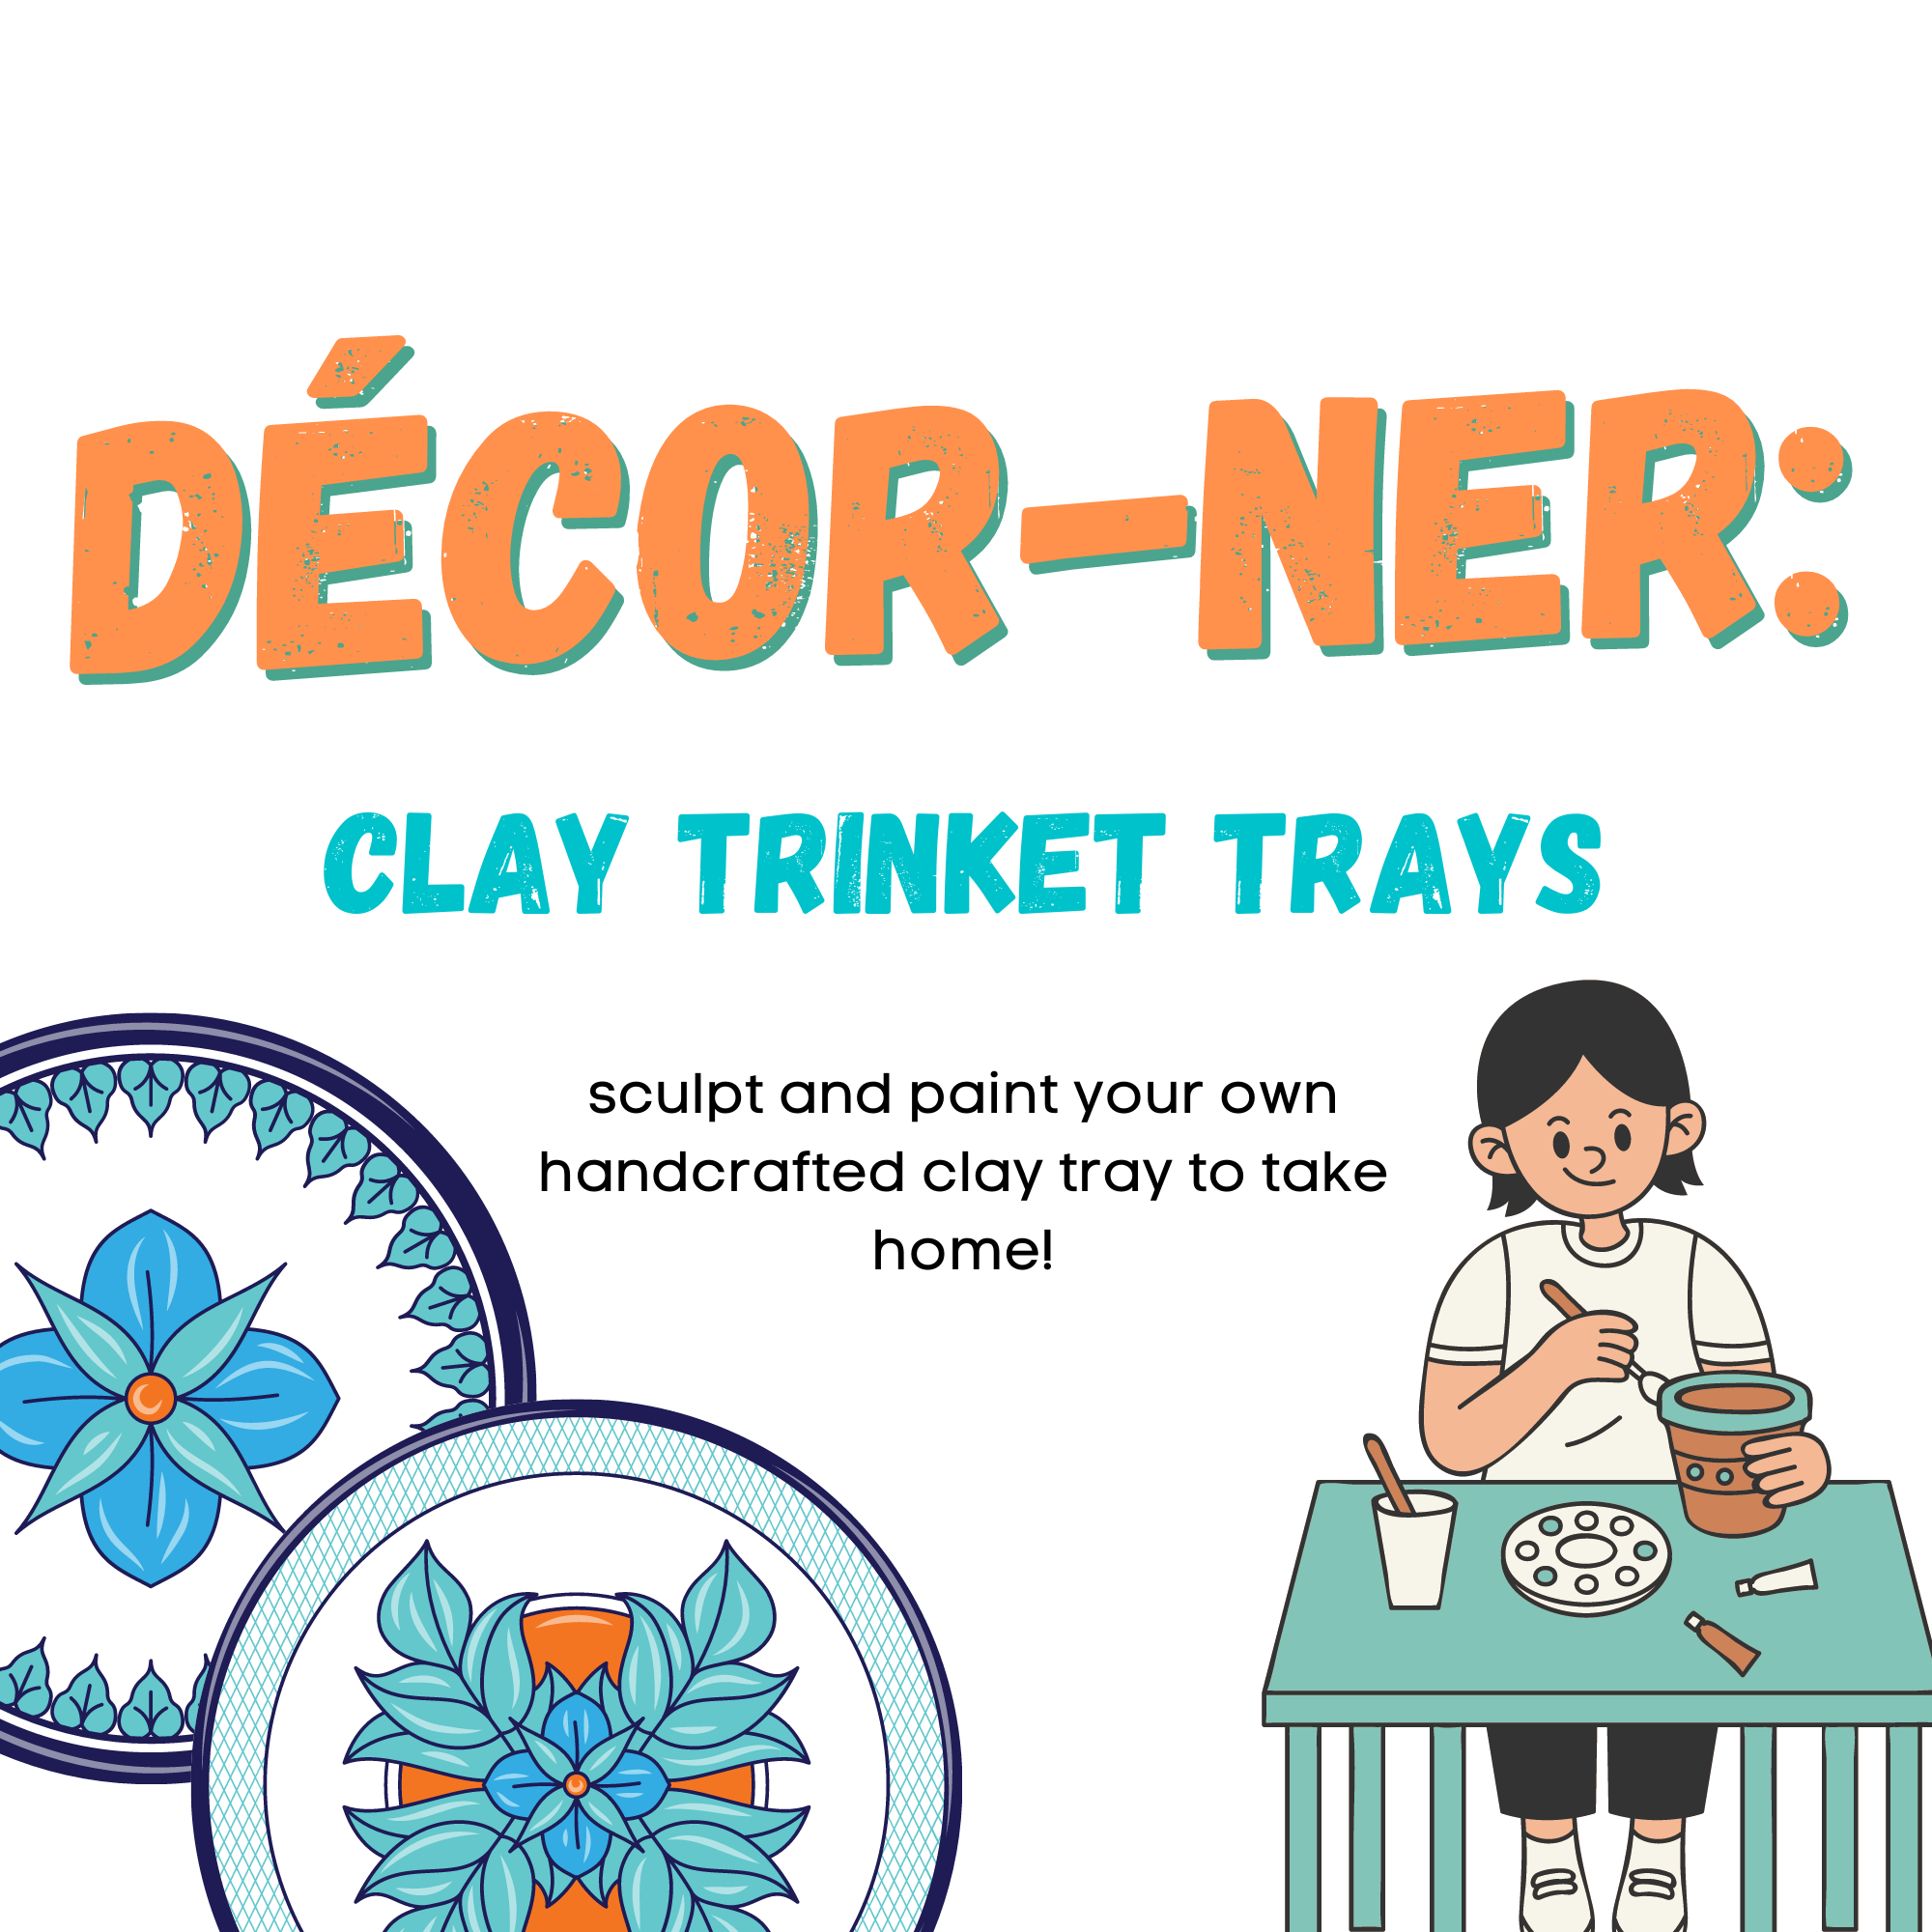 Text reading "Decor ner: Clay Trinket Trays" with images of decorated trays and a person with black hair painting a clay object.